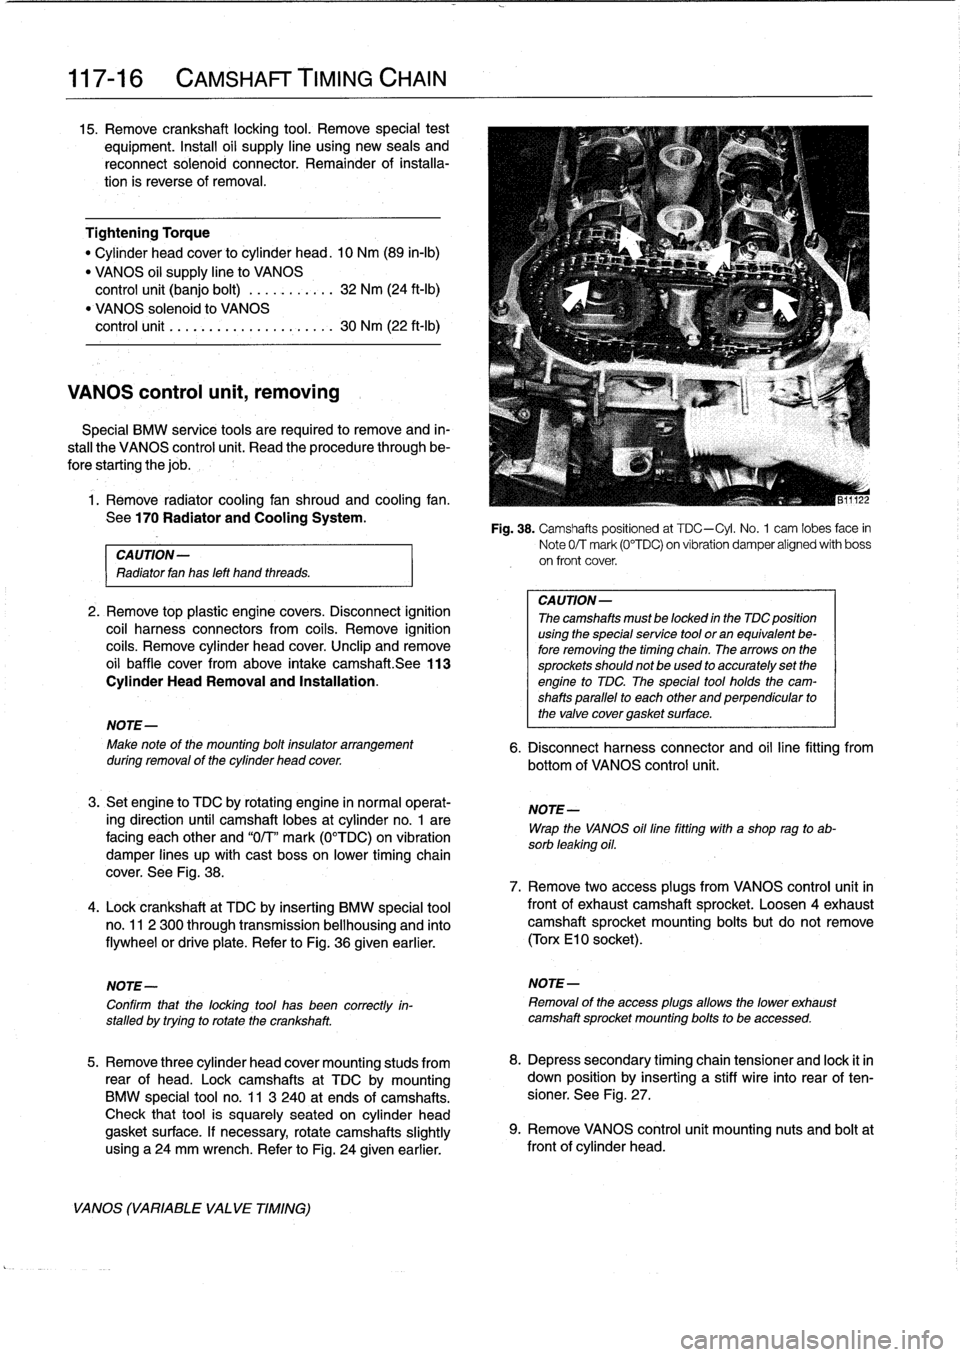 BMW 318i 1997 E36 Owners Guide 
117-
1
6

	

CAMSHAFT
TIMING
CHAIN

15
.
Remove
crankshaft
locking
tool
.
Remove
special
test

equipment
.
Insta¡¡
oil
supply
line
using
new
seals
and

reconnect
solenoid
connector
.
Remainder
of
i